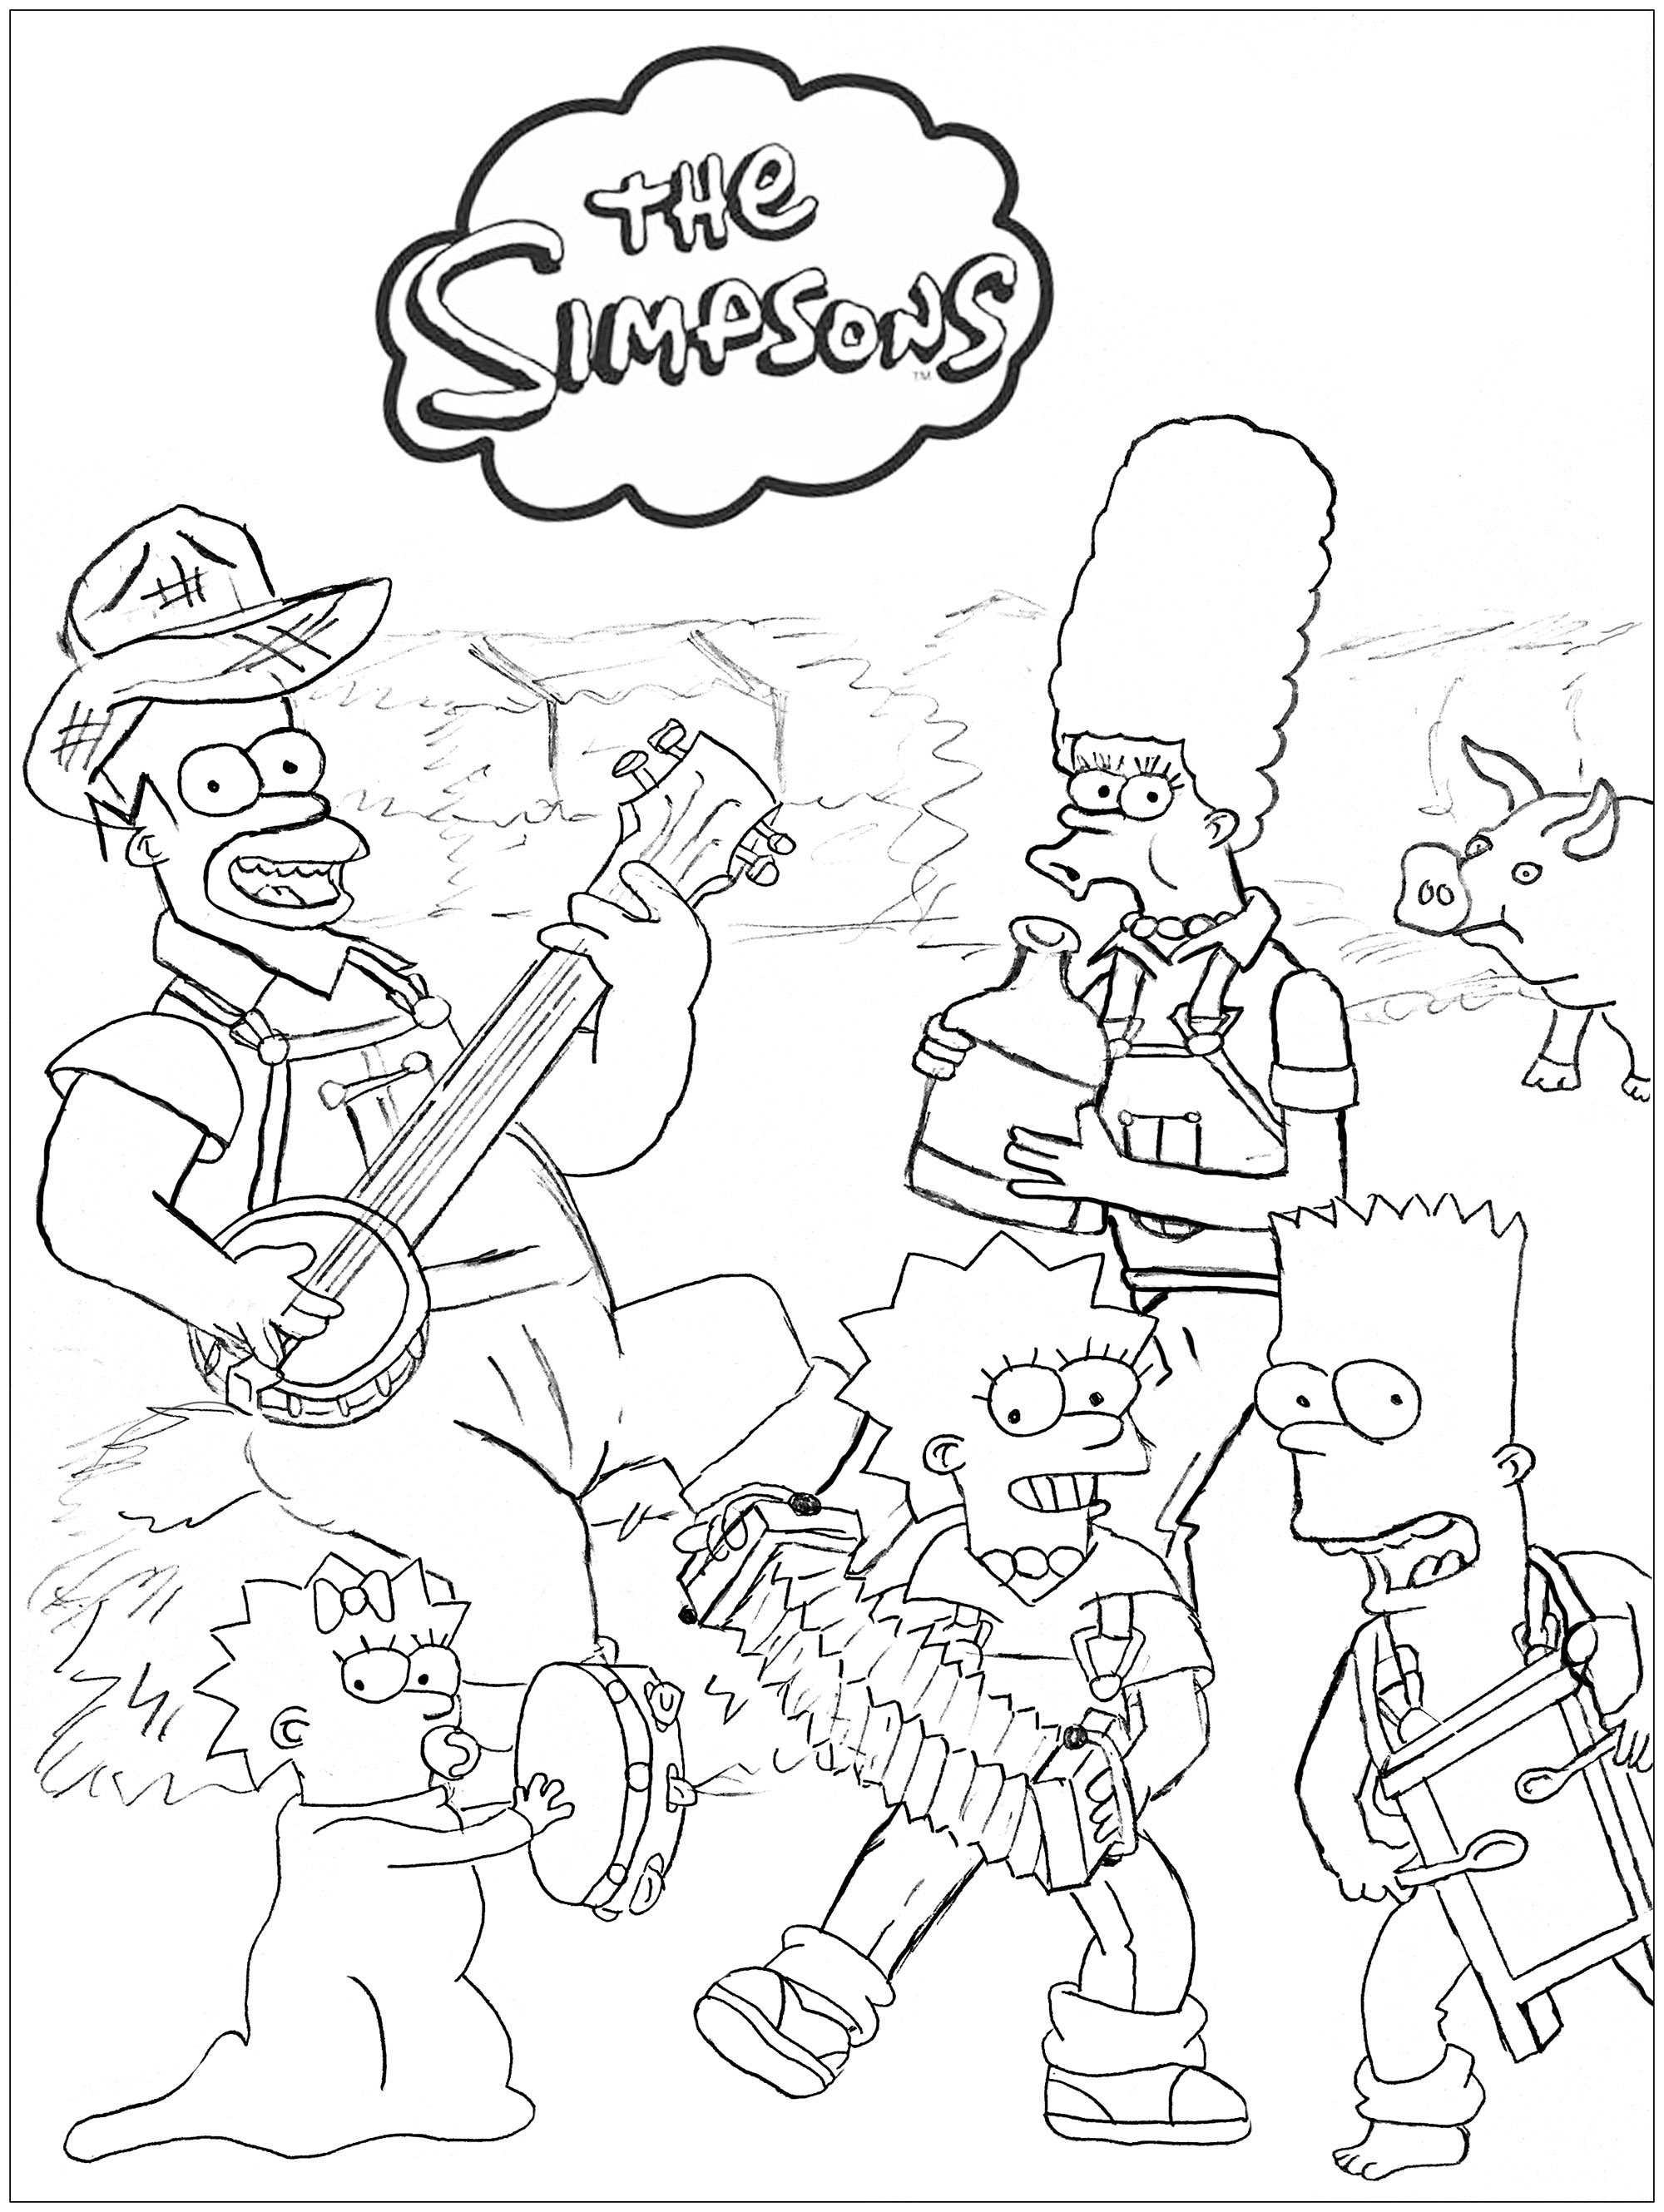 The Simpsons at the farm : an original drawing created by Romain